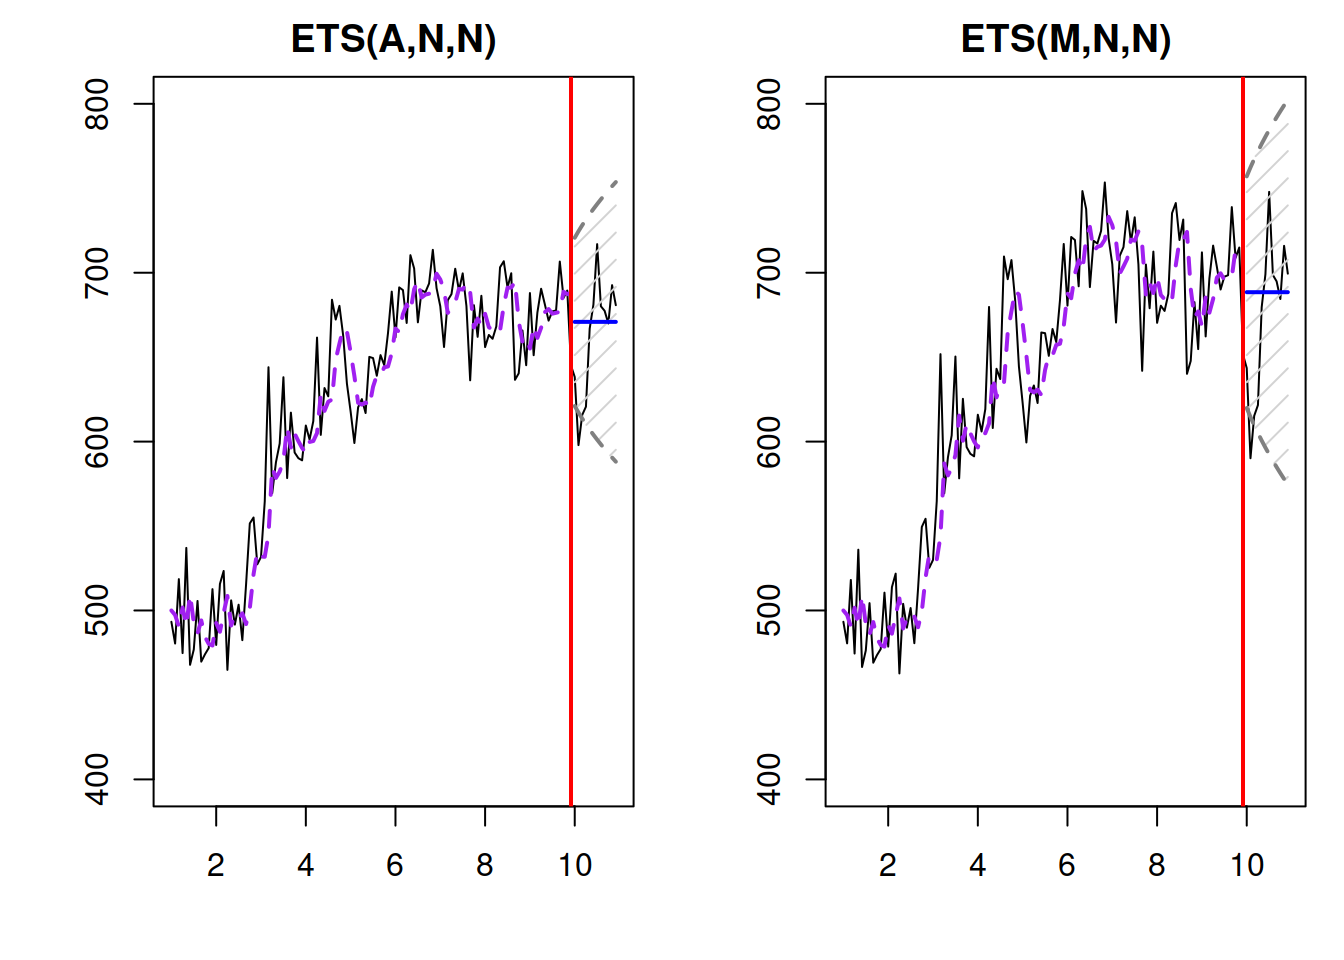 Data generated from ETS(A,N,N) and ETS(M,N,N).